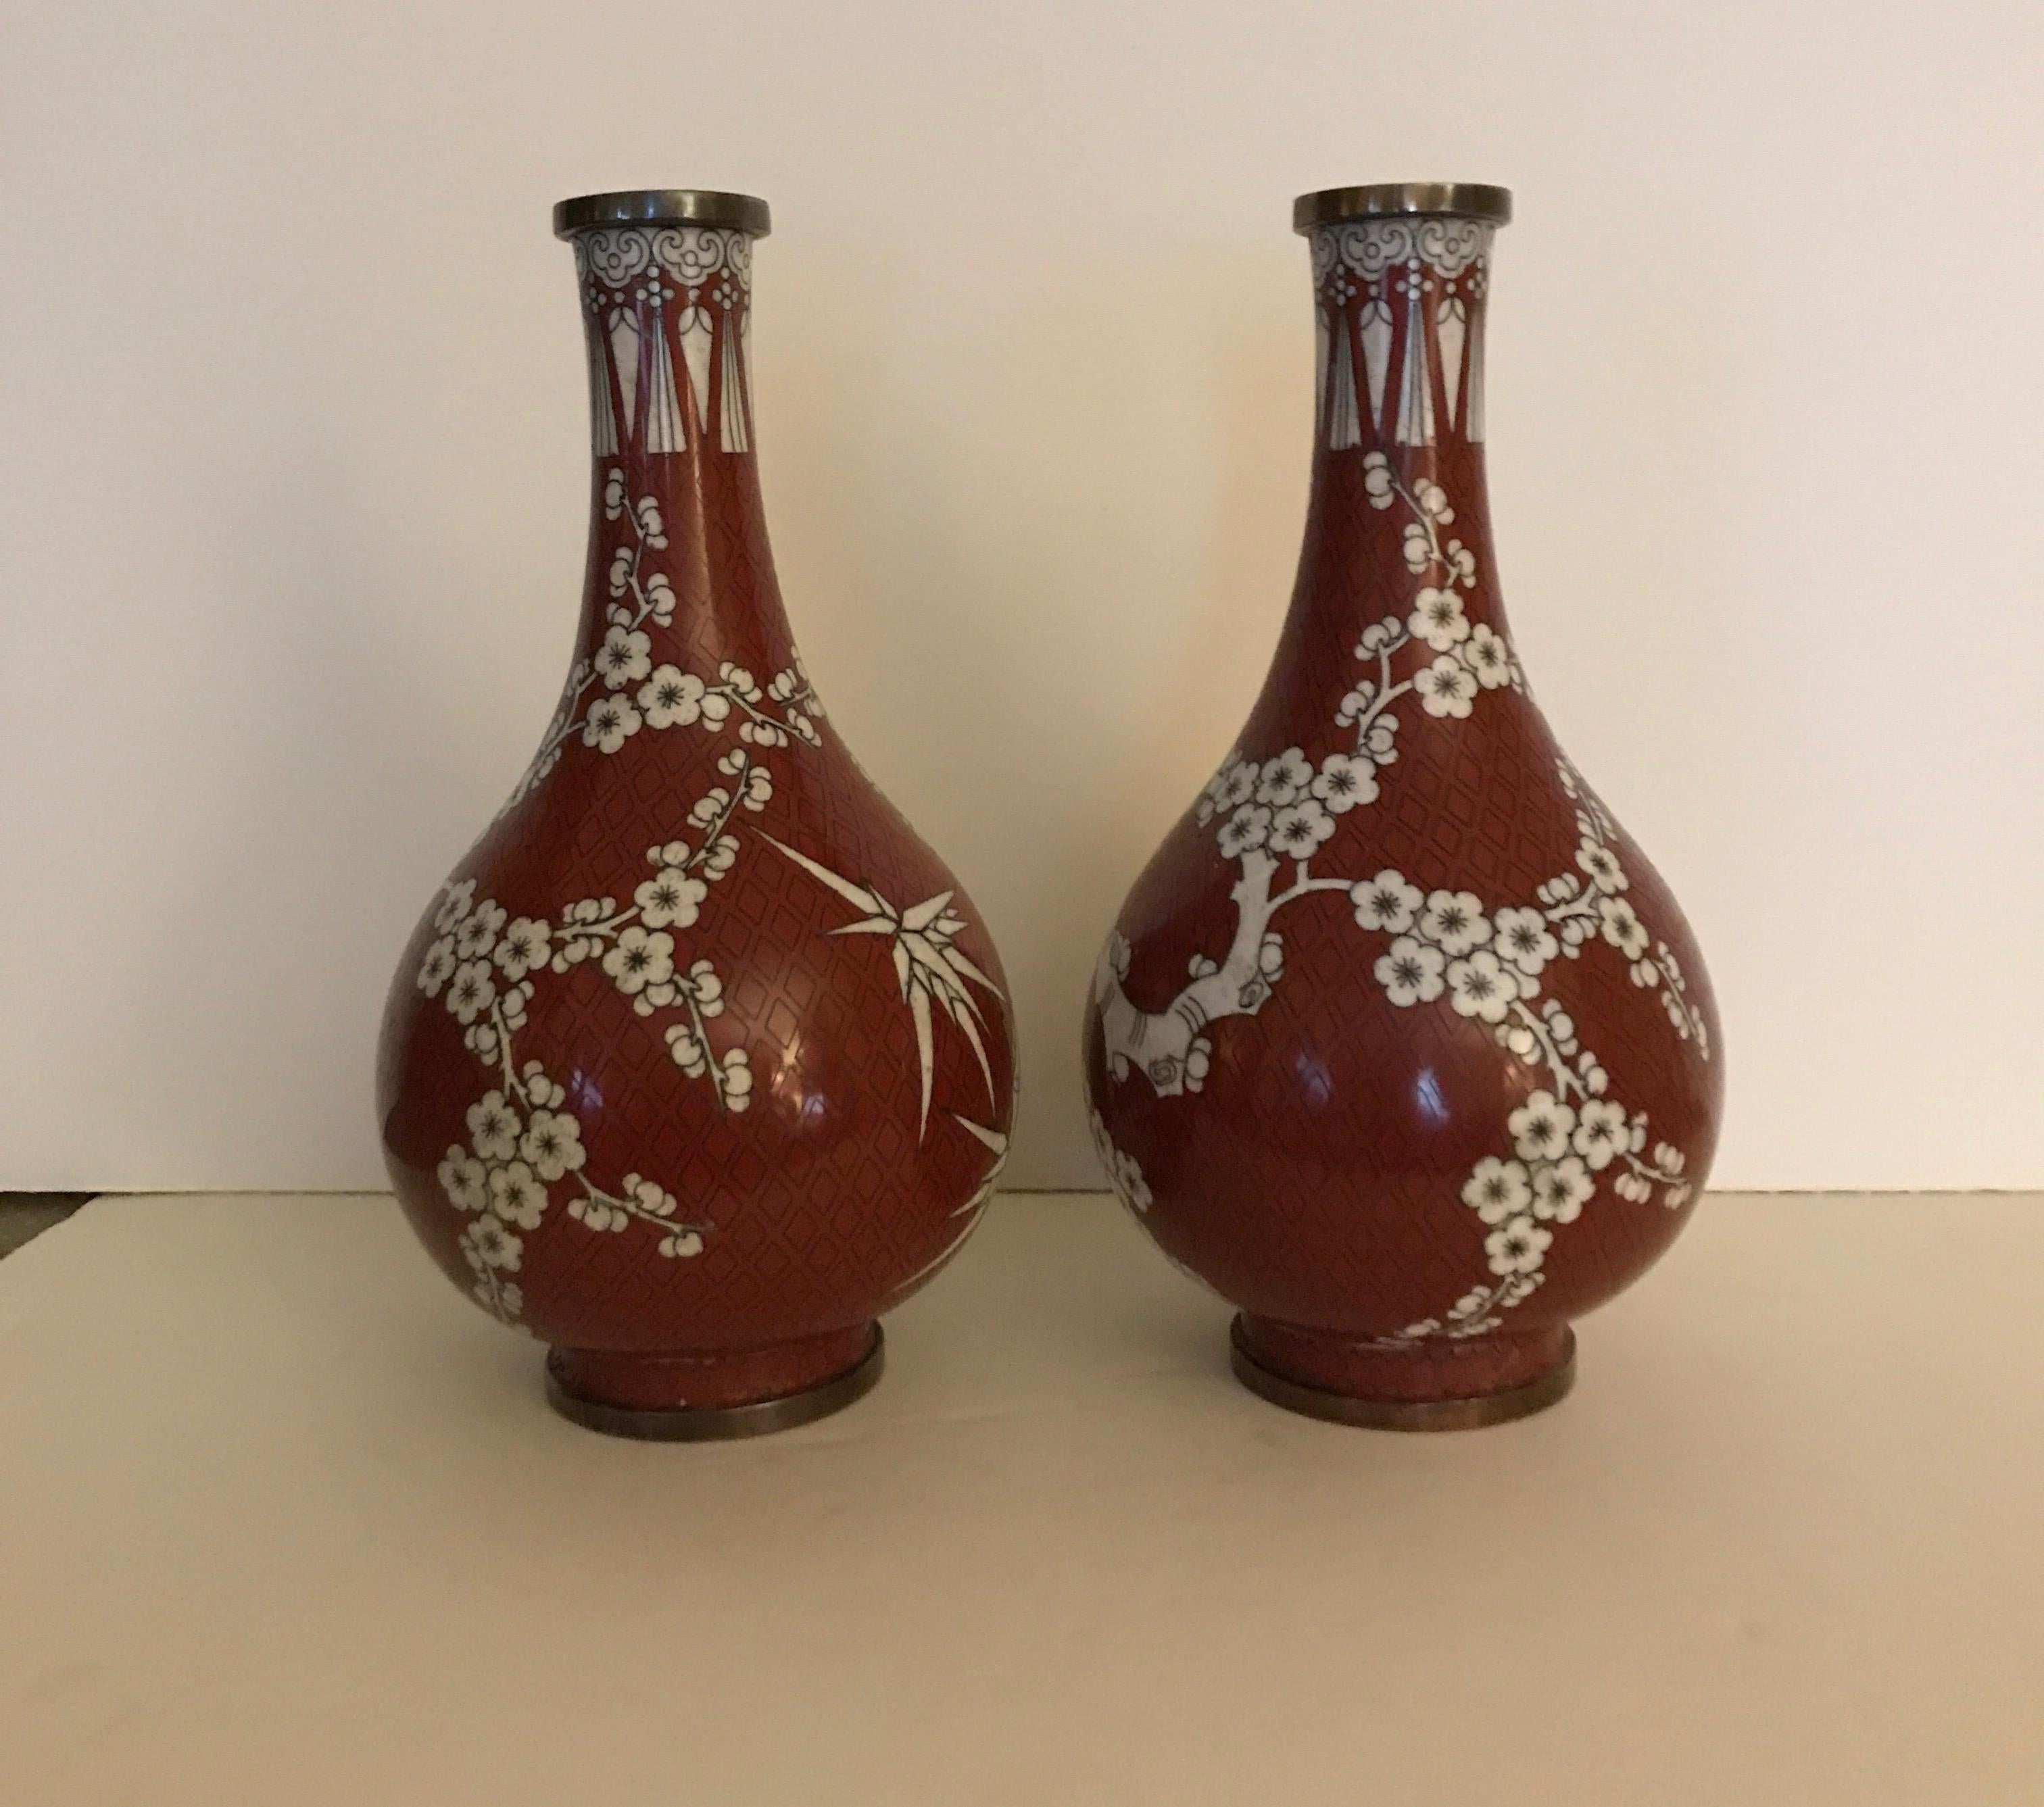 A Fine Pair of Antique Chinese Cloisonné Gord Form Vases, circa 1900 For Sale 5